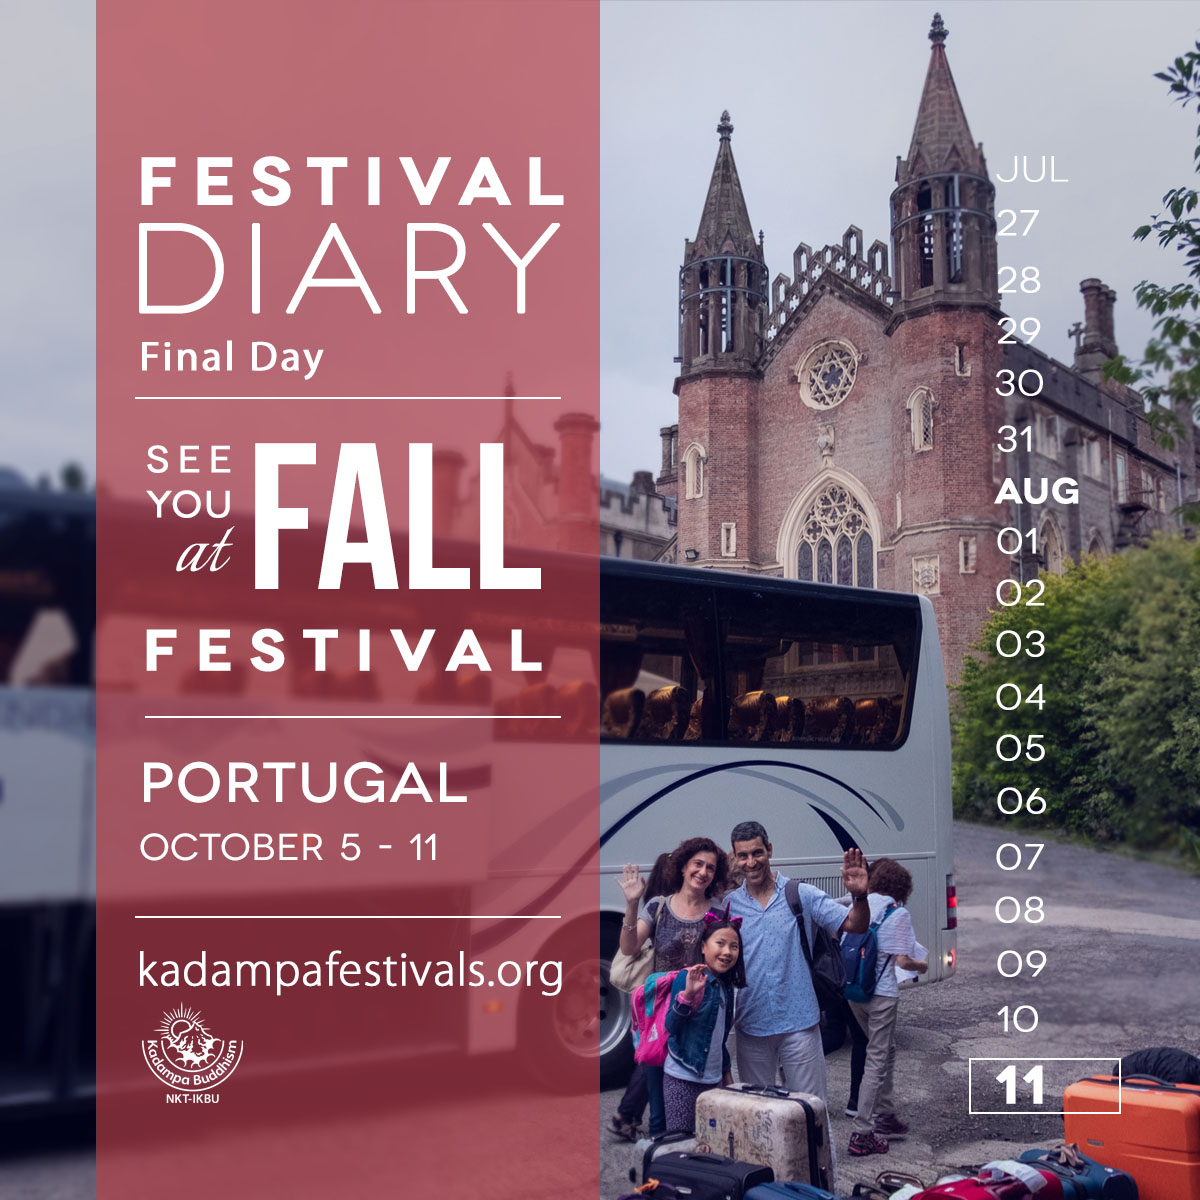 2018-07-26-festival diary-final-day